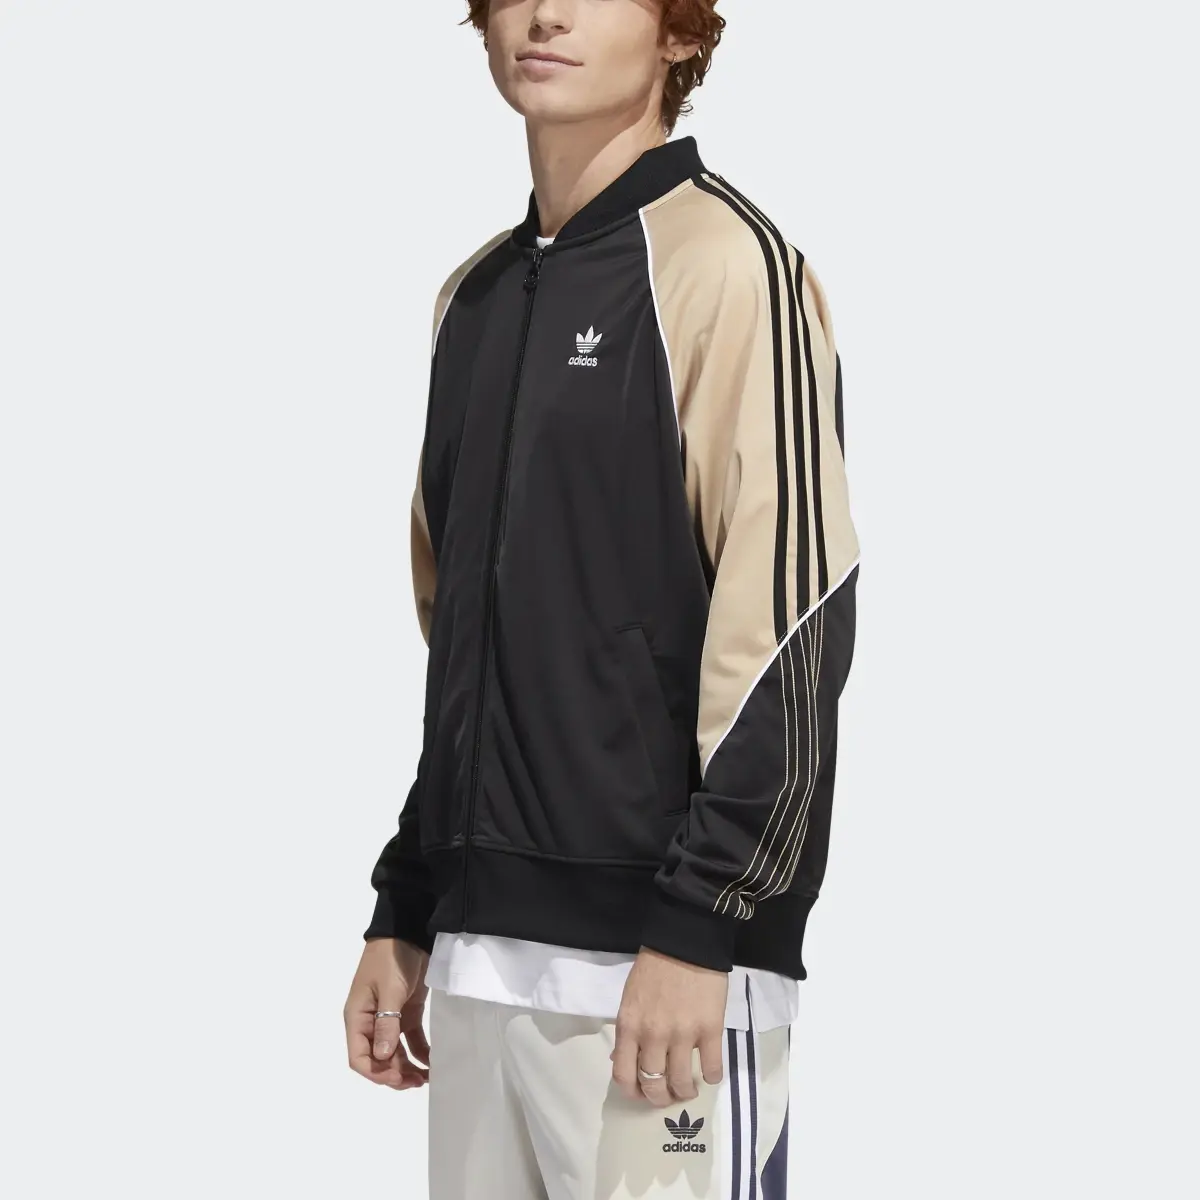 Adidas Tricot SST Track Top. 1